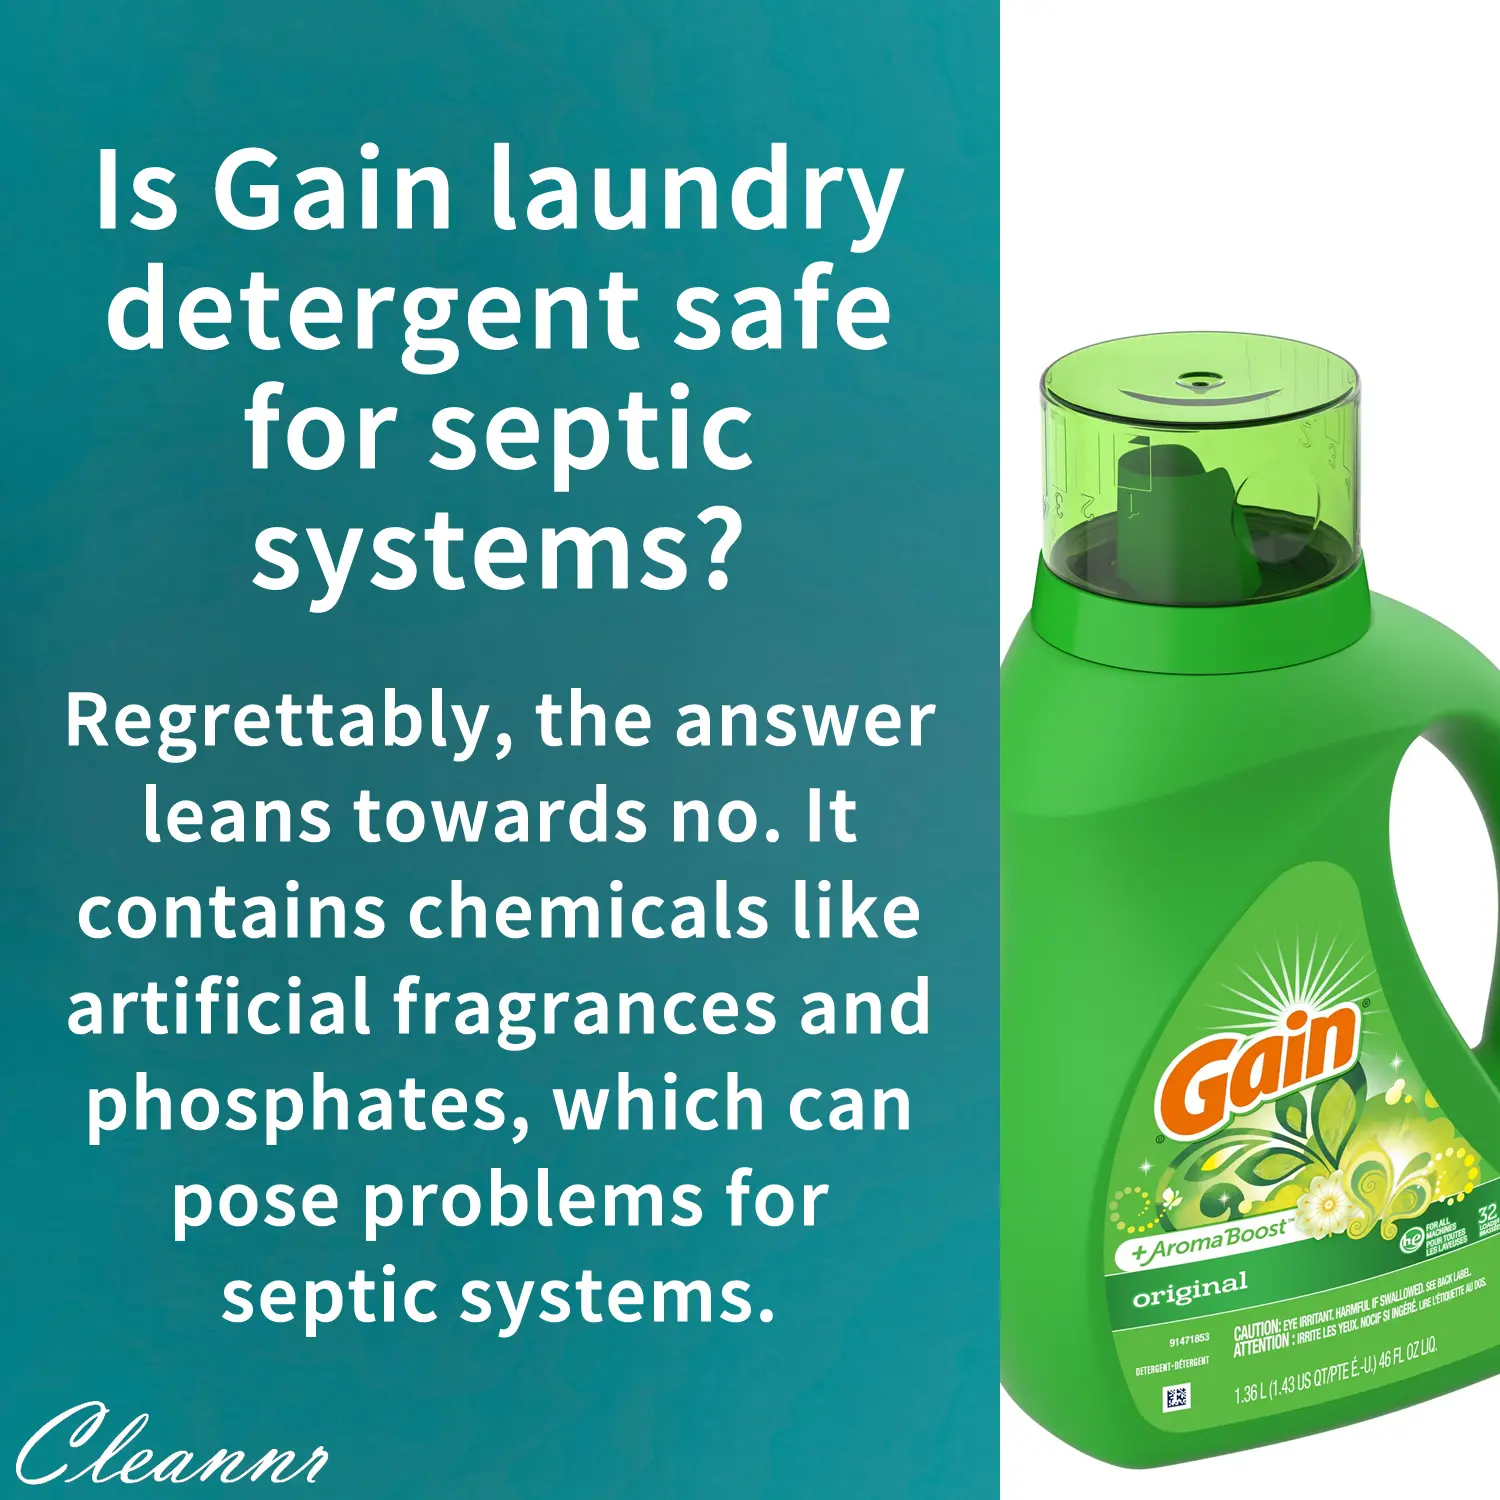 Is Gain laundry detergent safe for septic systems